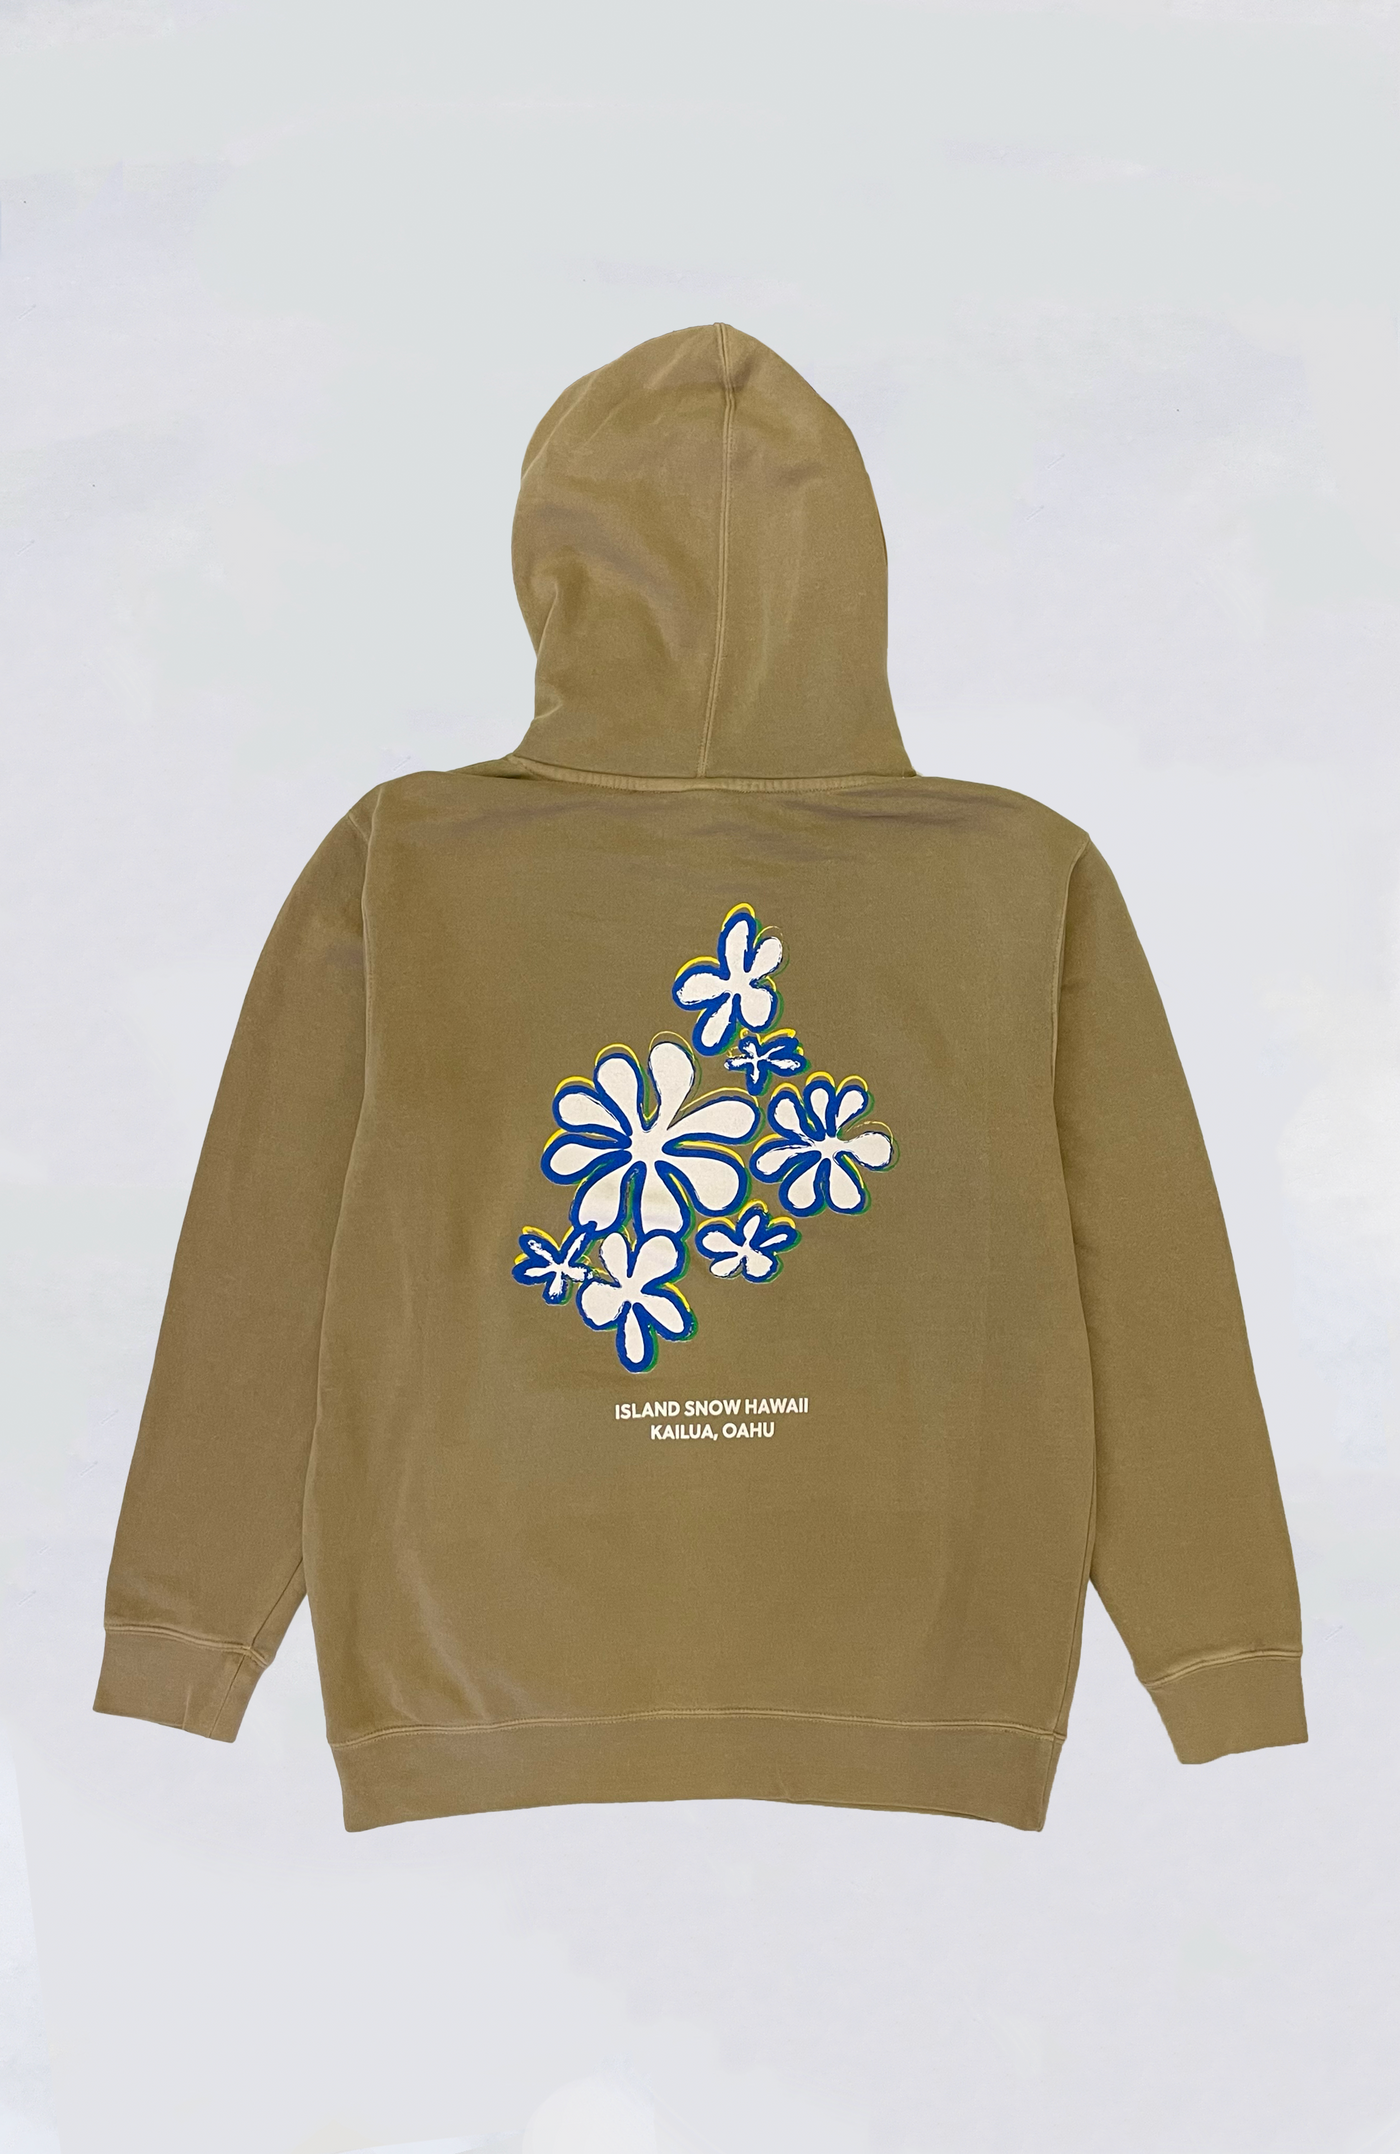 Island Snow Hawaii Garment Dyed Pullover Hoodie - IS Pua Party